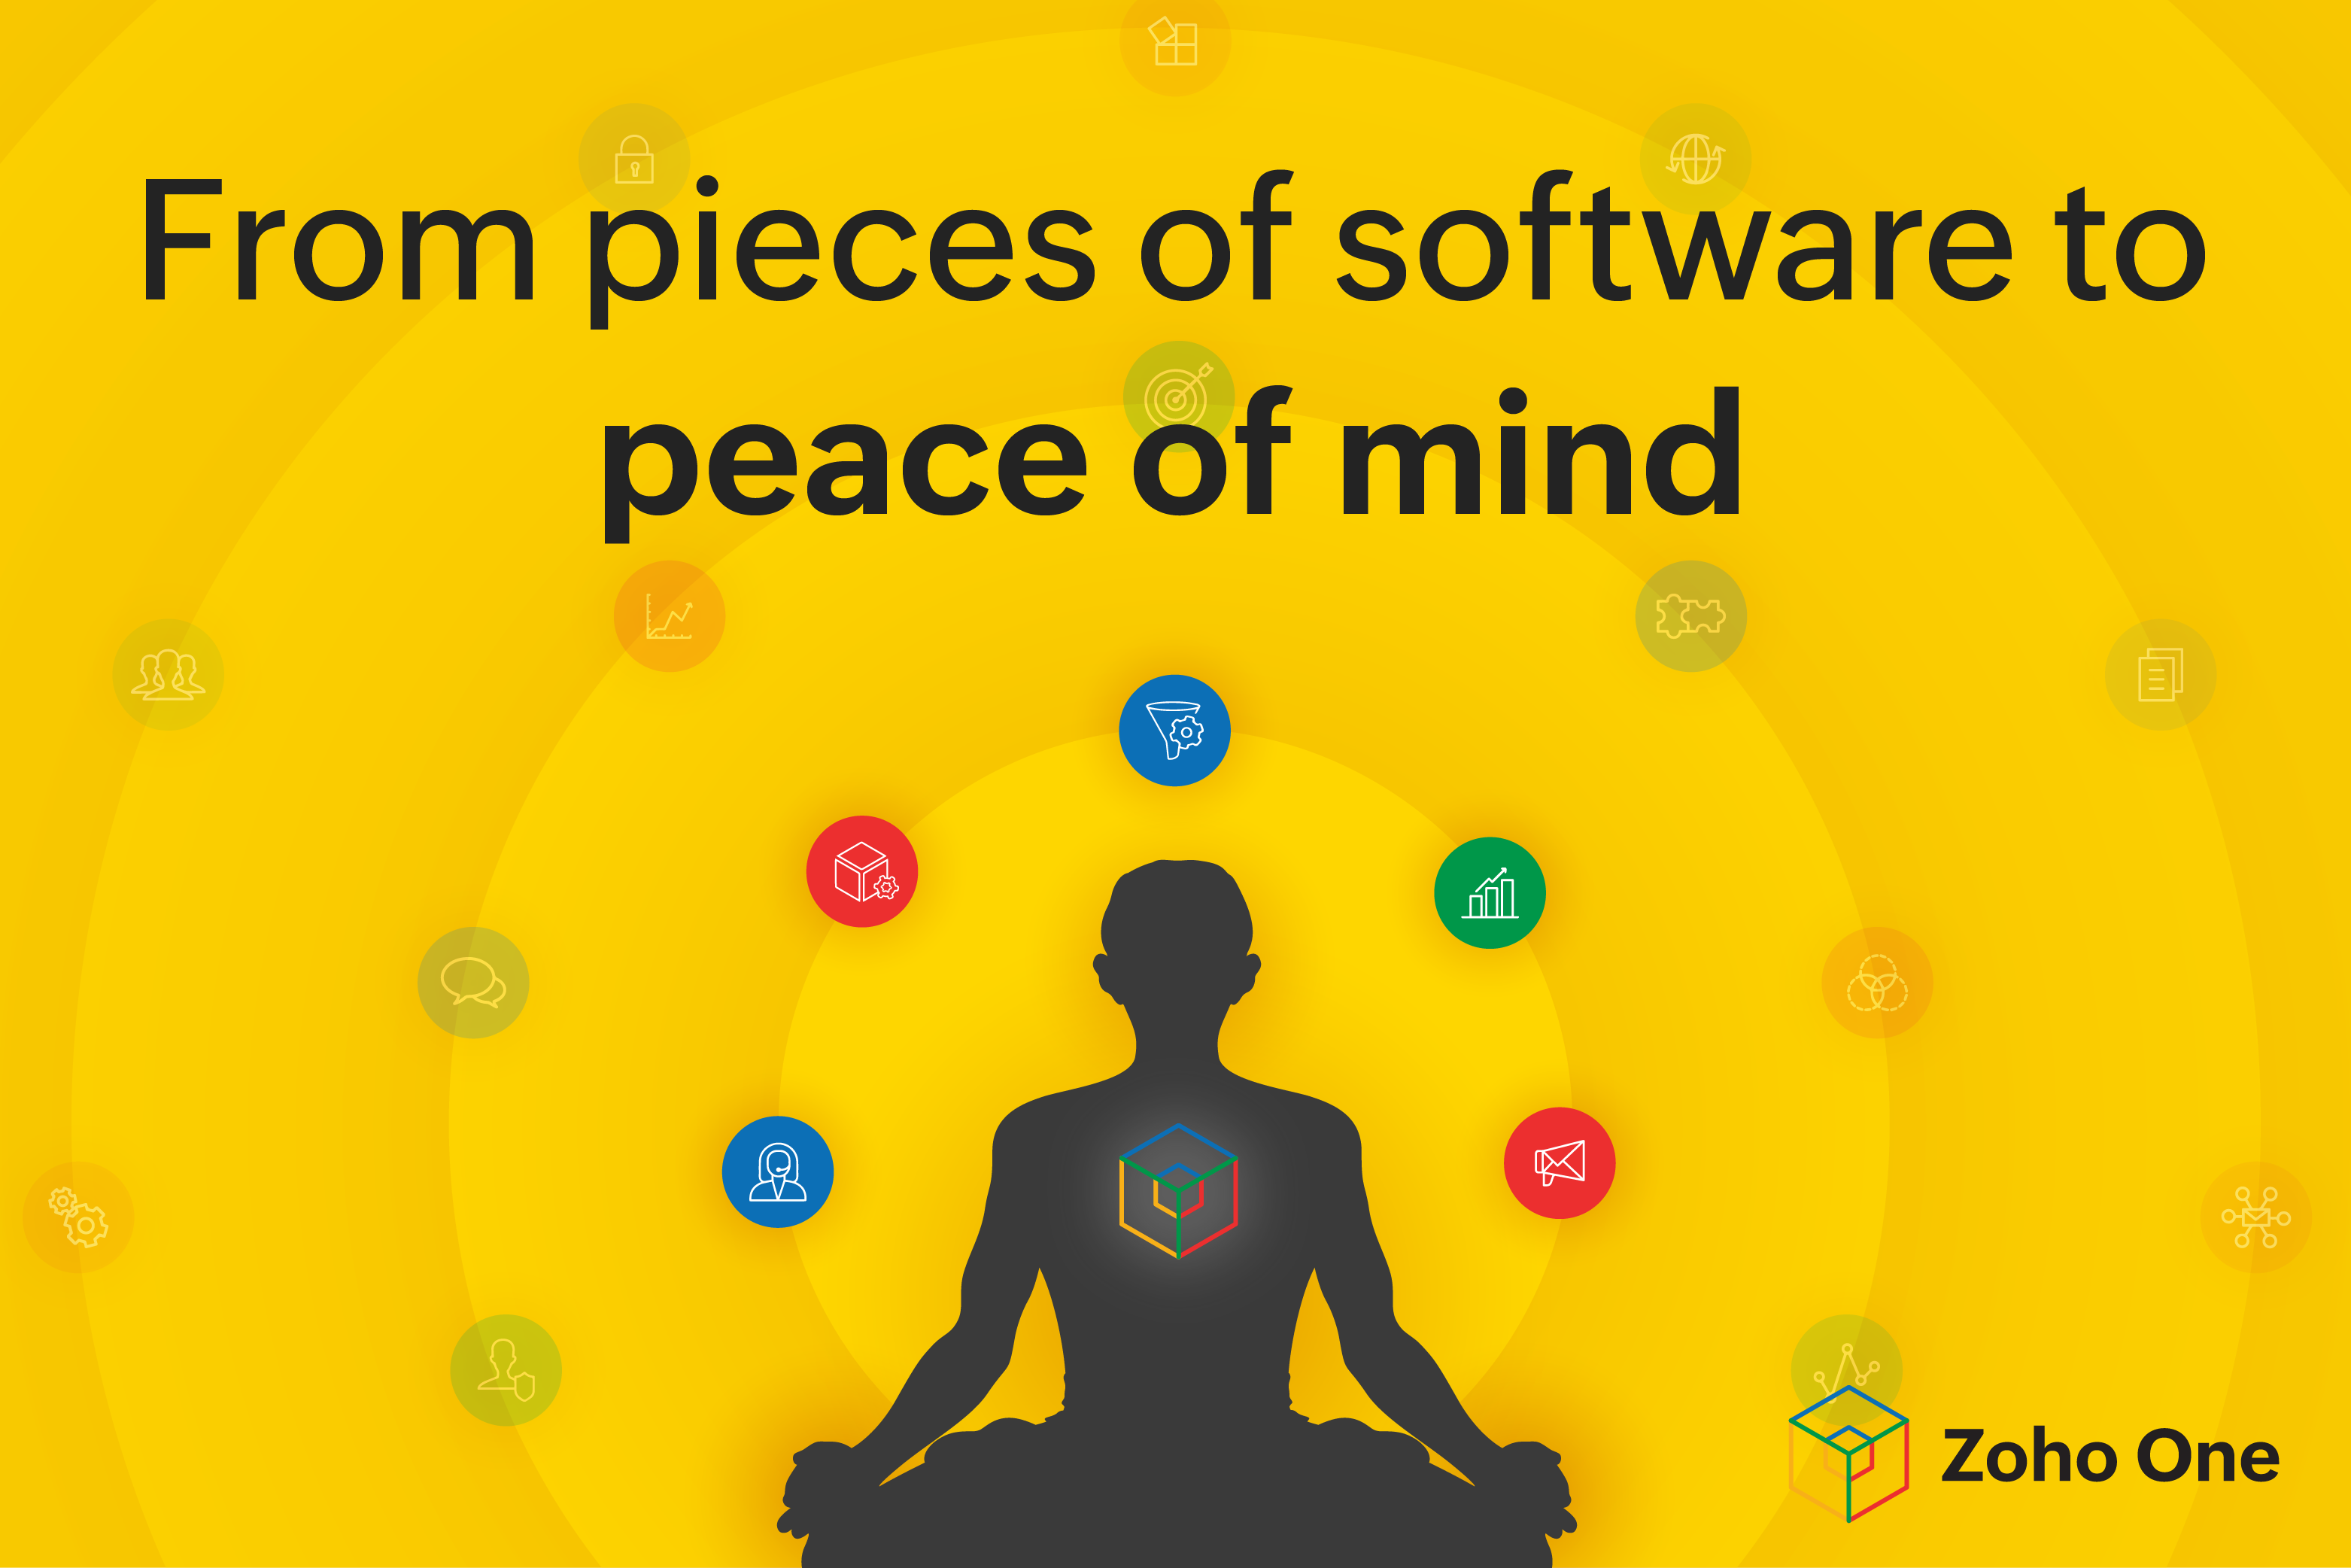 From pieces of software to peace of mind